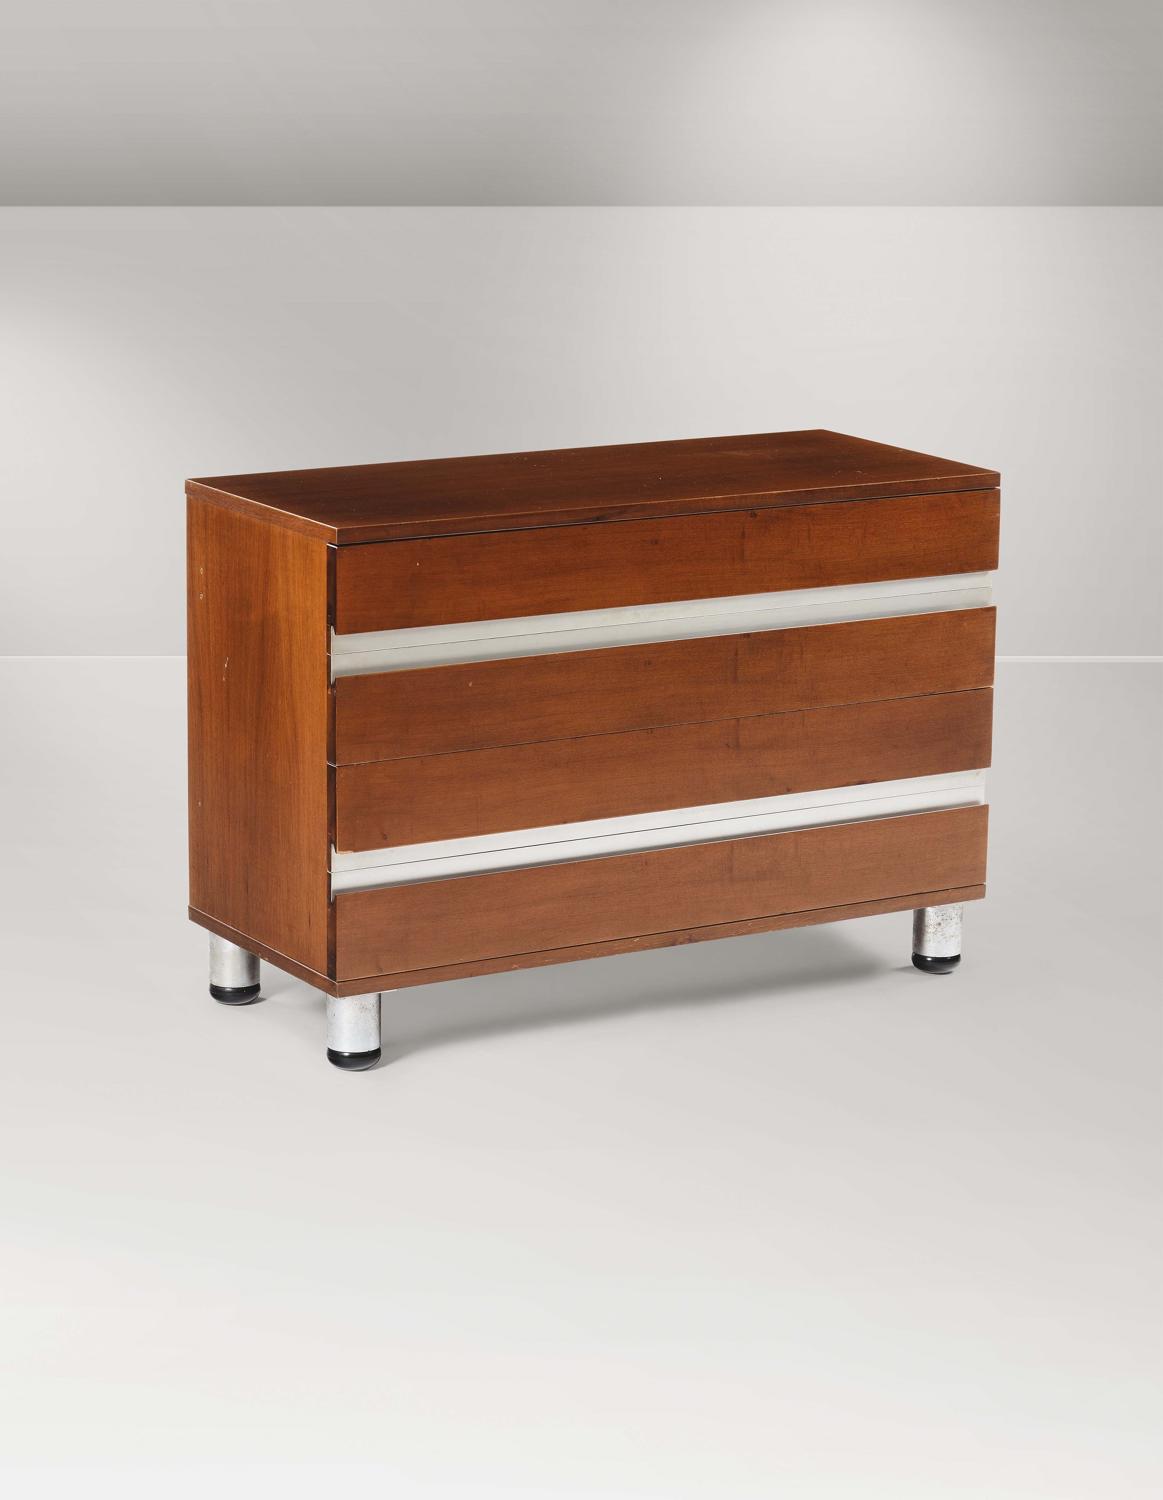 Ico Parisi for MIM chest of drawers